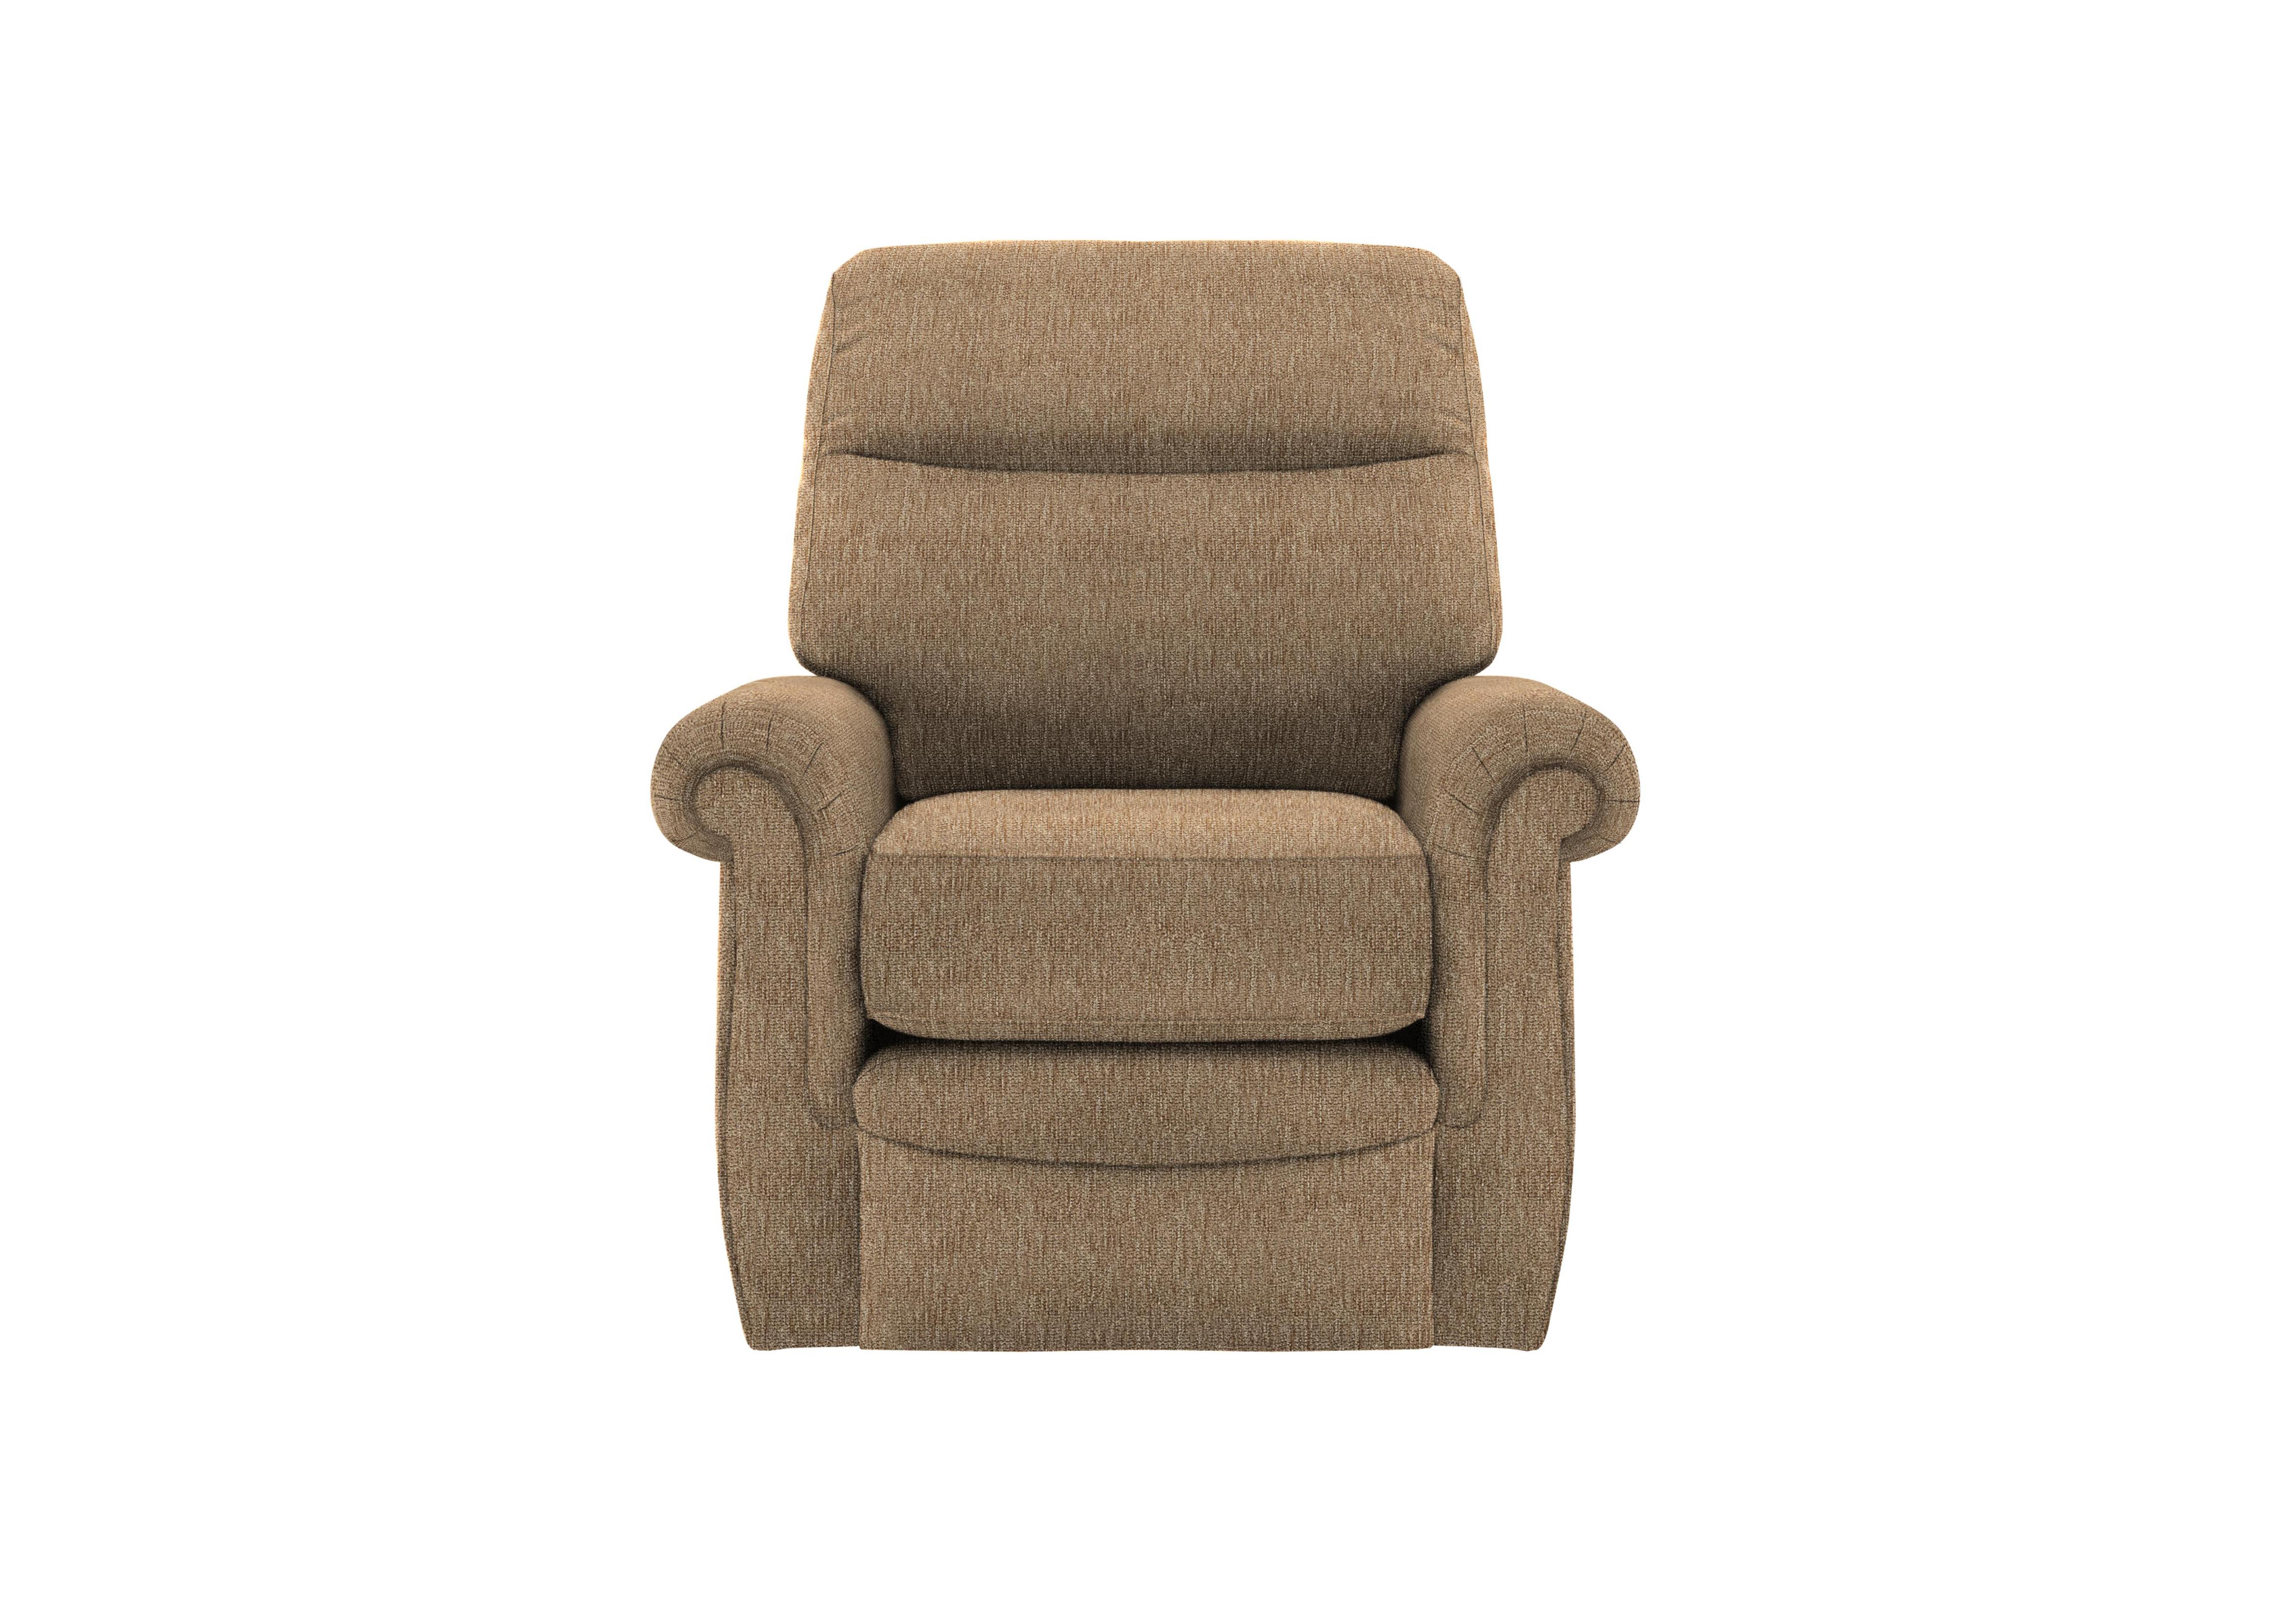 Avon Fabric Armchair in A070 Boucle Cocoa on Furniture Village